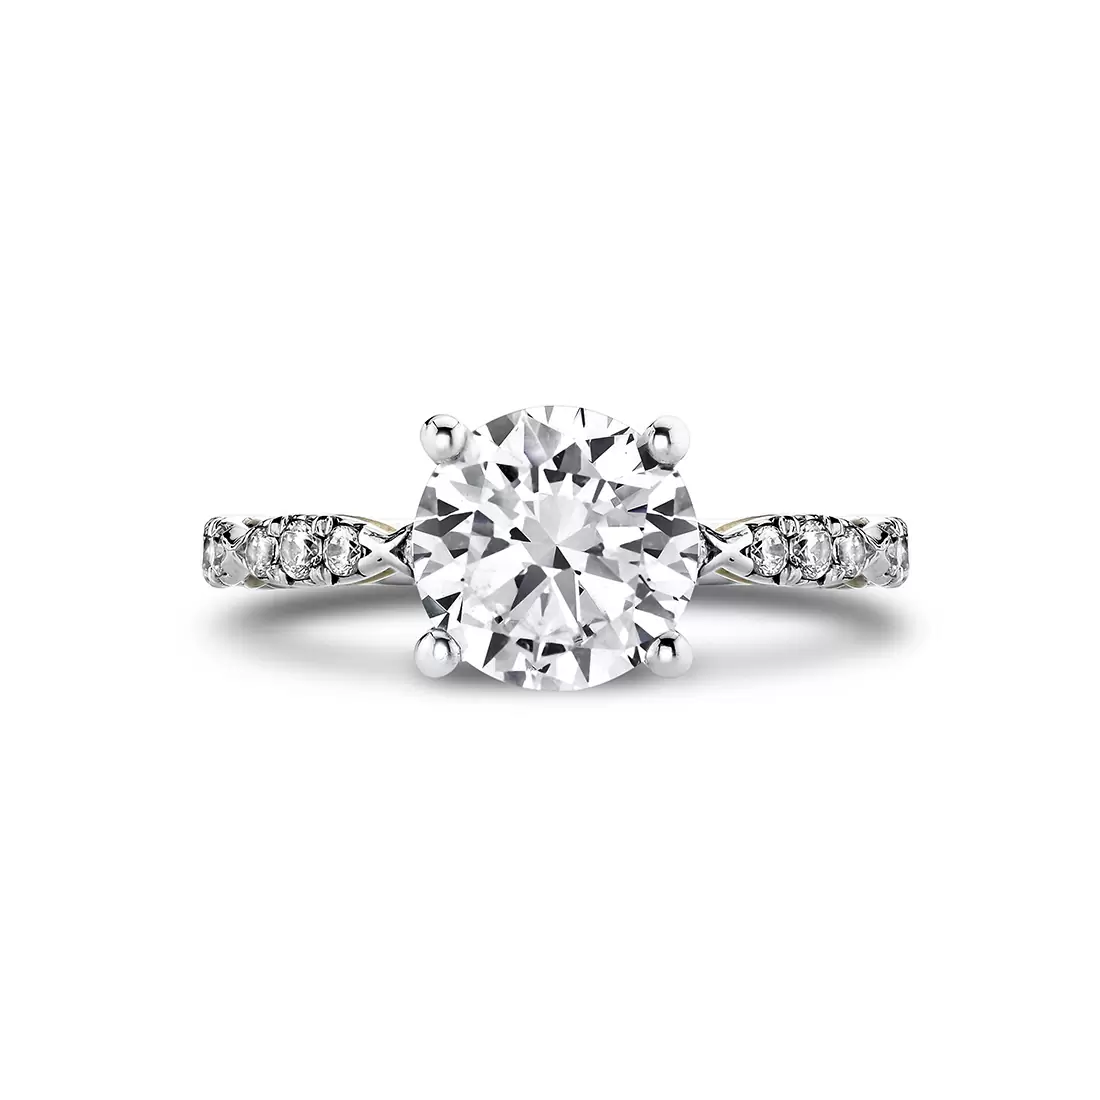 Iconelle two tone pinched engagement ring